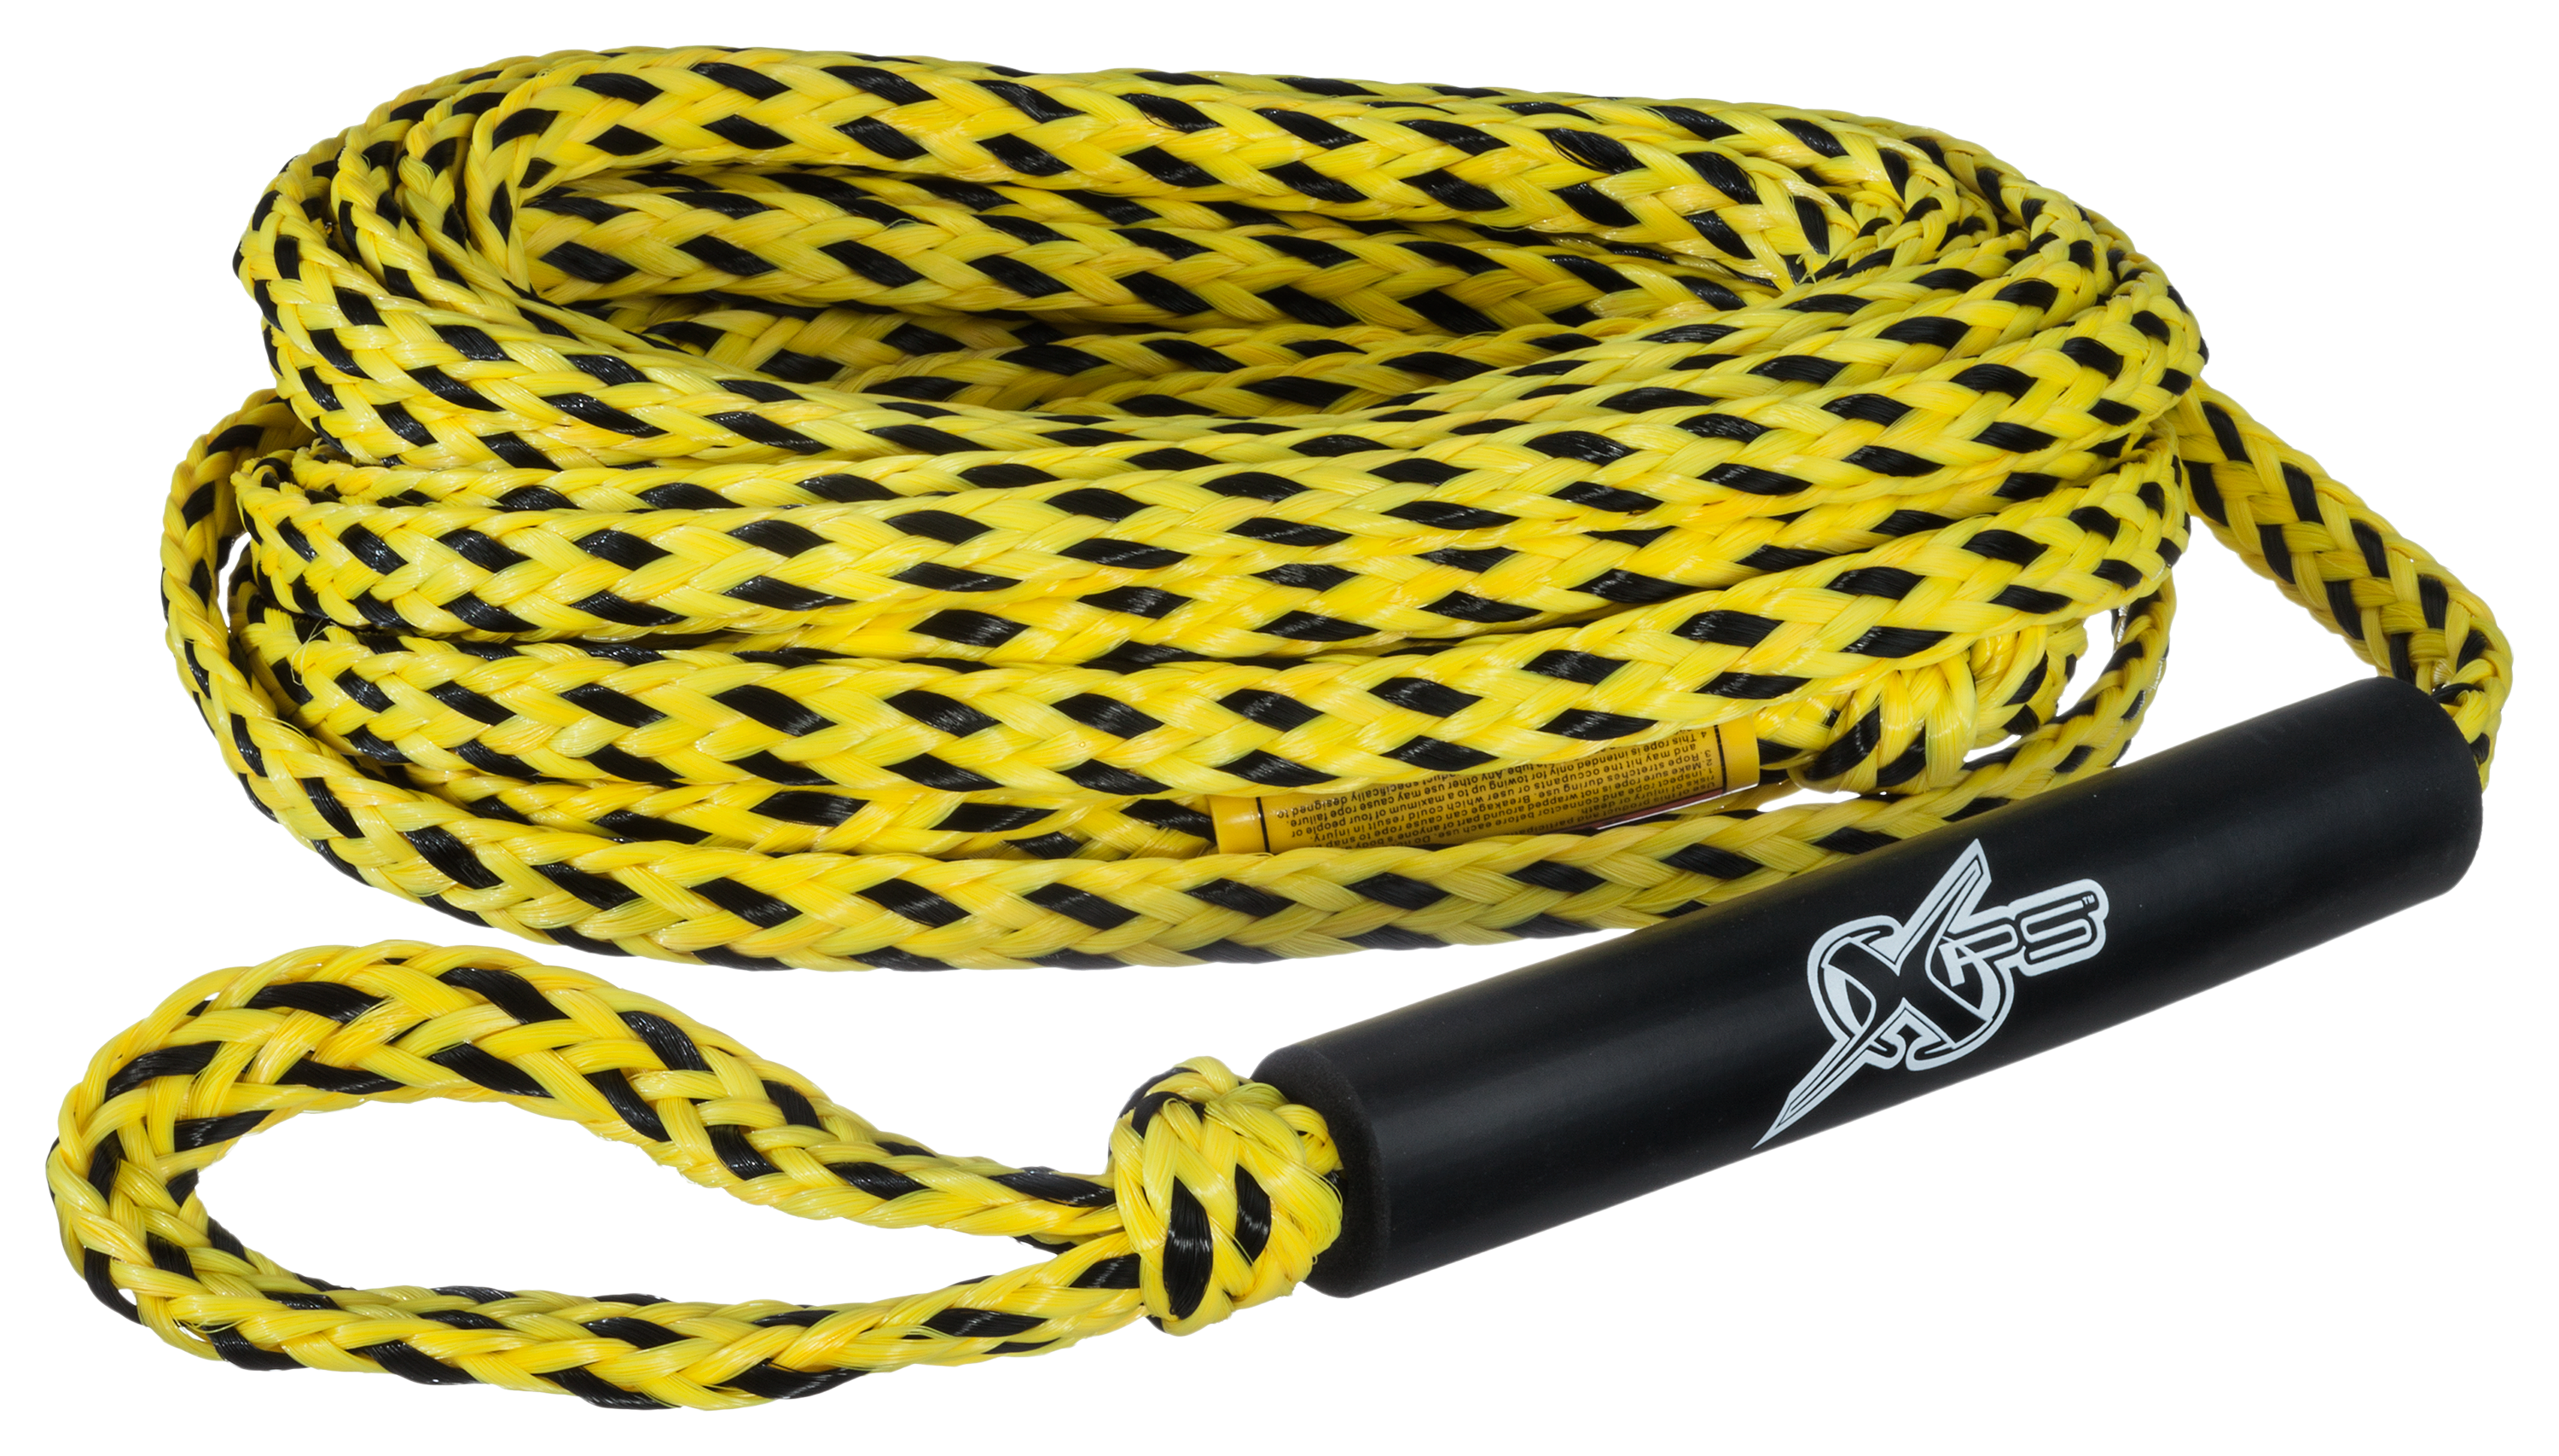 Buy MESLE Tow-Rope Pro 4P 60', floating Towable Rope for 4-Person,  yellow-black, Length 18.3 m 60', Polyethylen, Drag-Line, buoyant floatable,  15 cm Eye, Fun-Tube, Tow-able, Boat Jet-Ski Yacht Online at desertcartCyprus